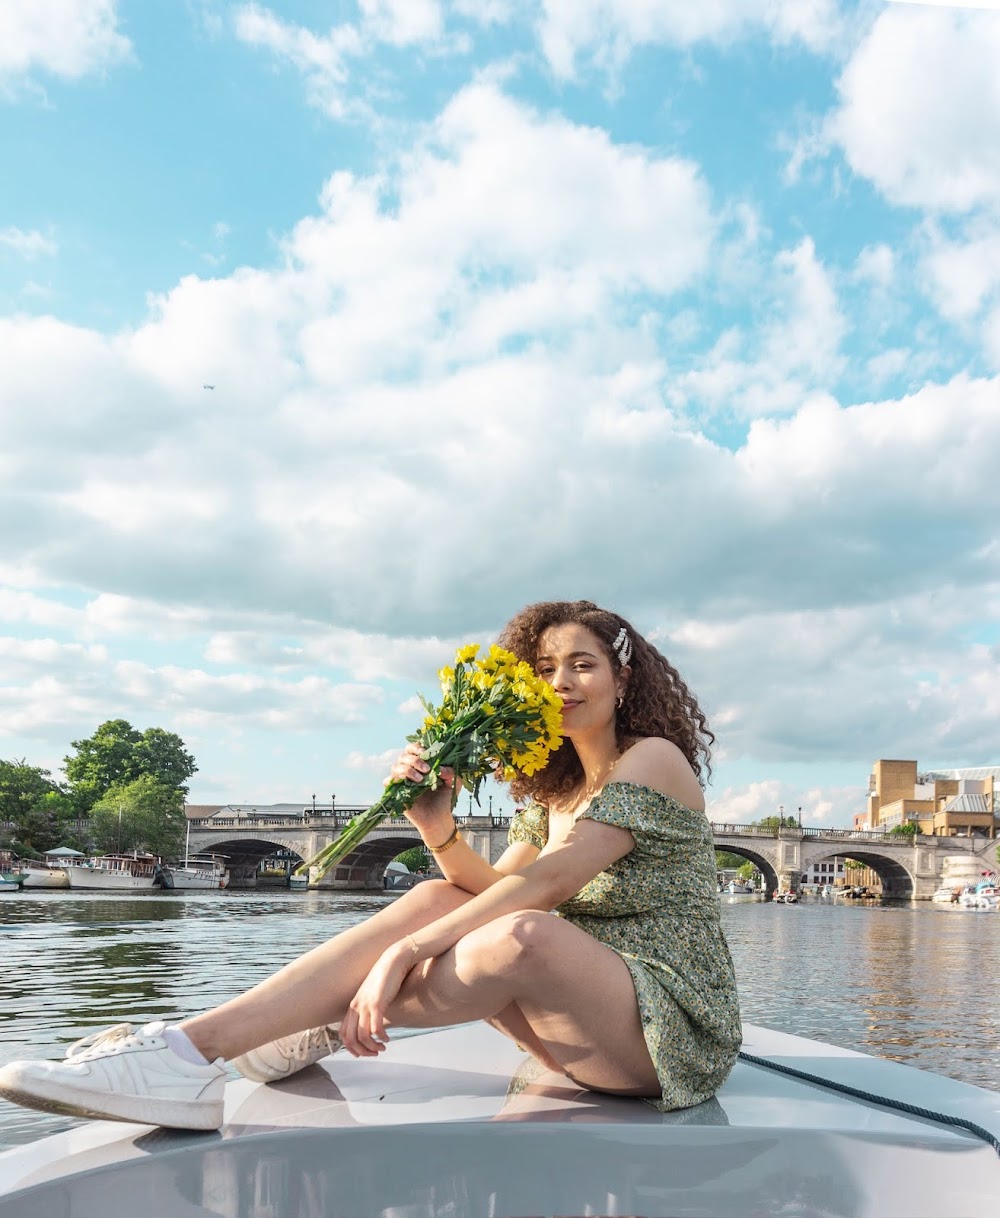 Self-Drive Boating With Go Boat London